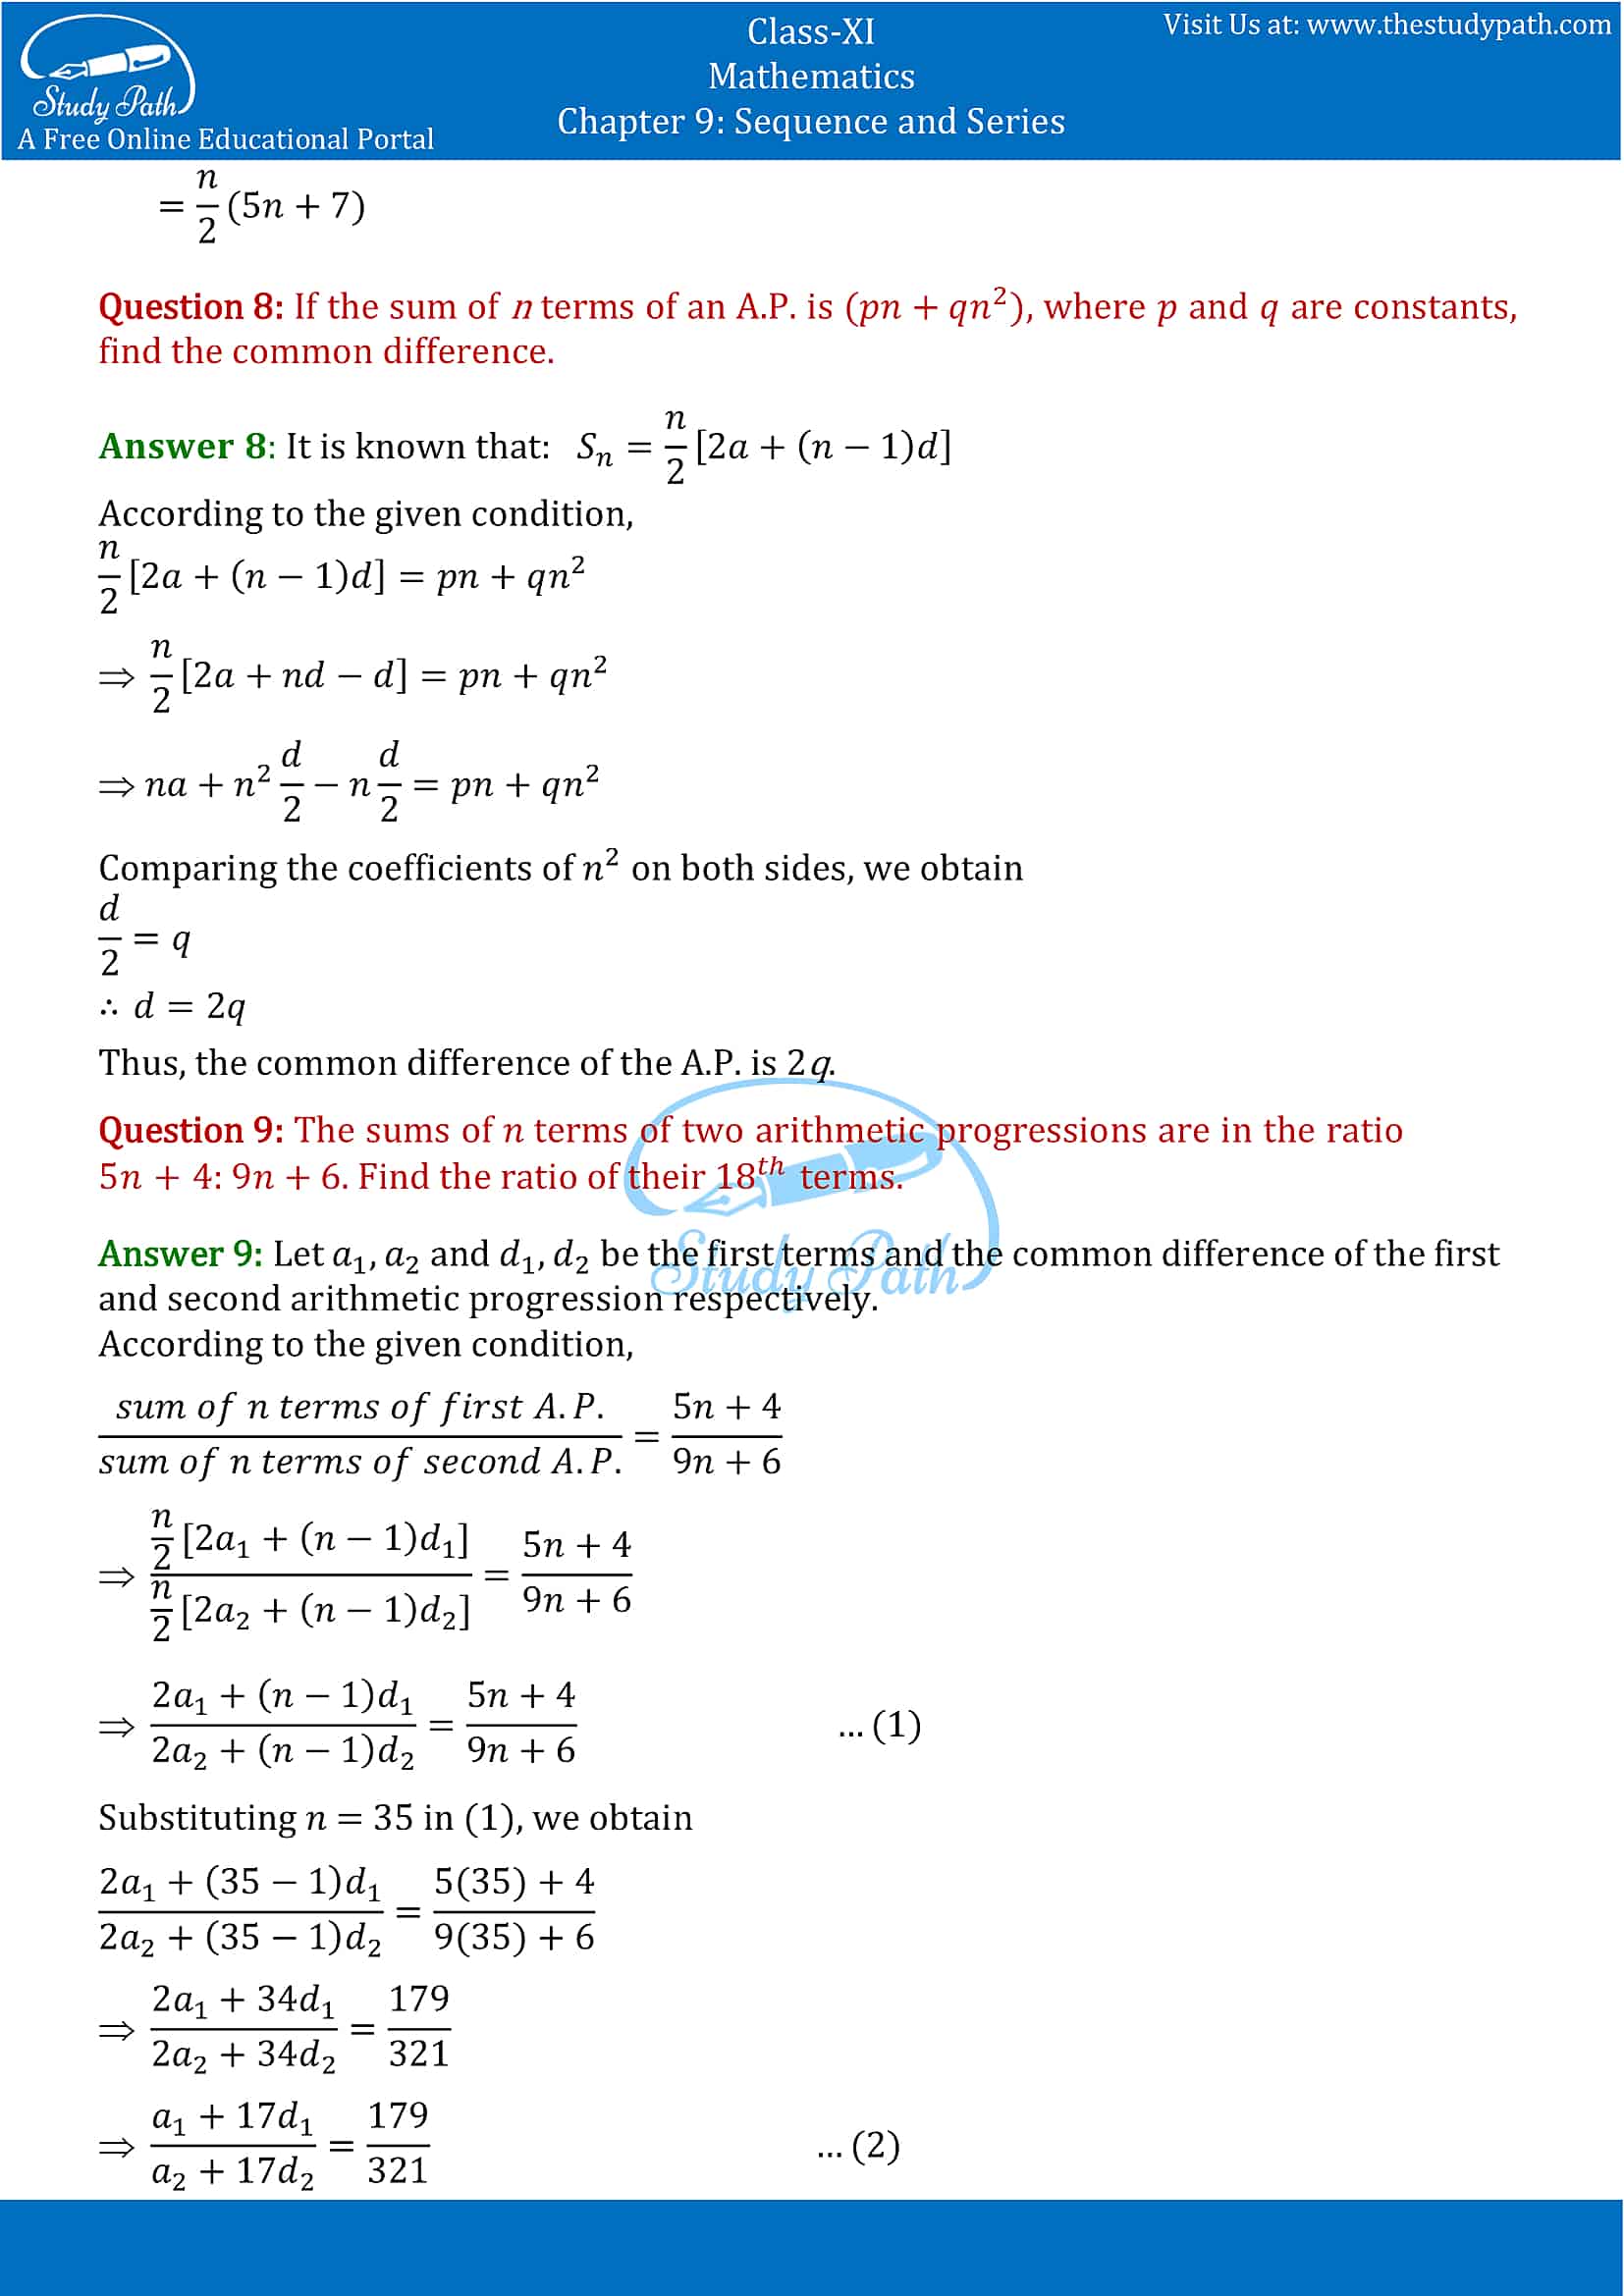 NCERT Solutions for Class 11 Maths chapter 9 Sequence and Series Exercise 9.2 Part-5